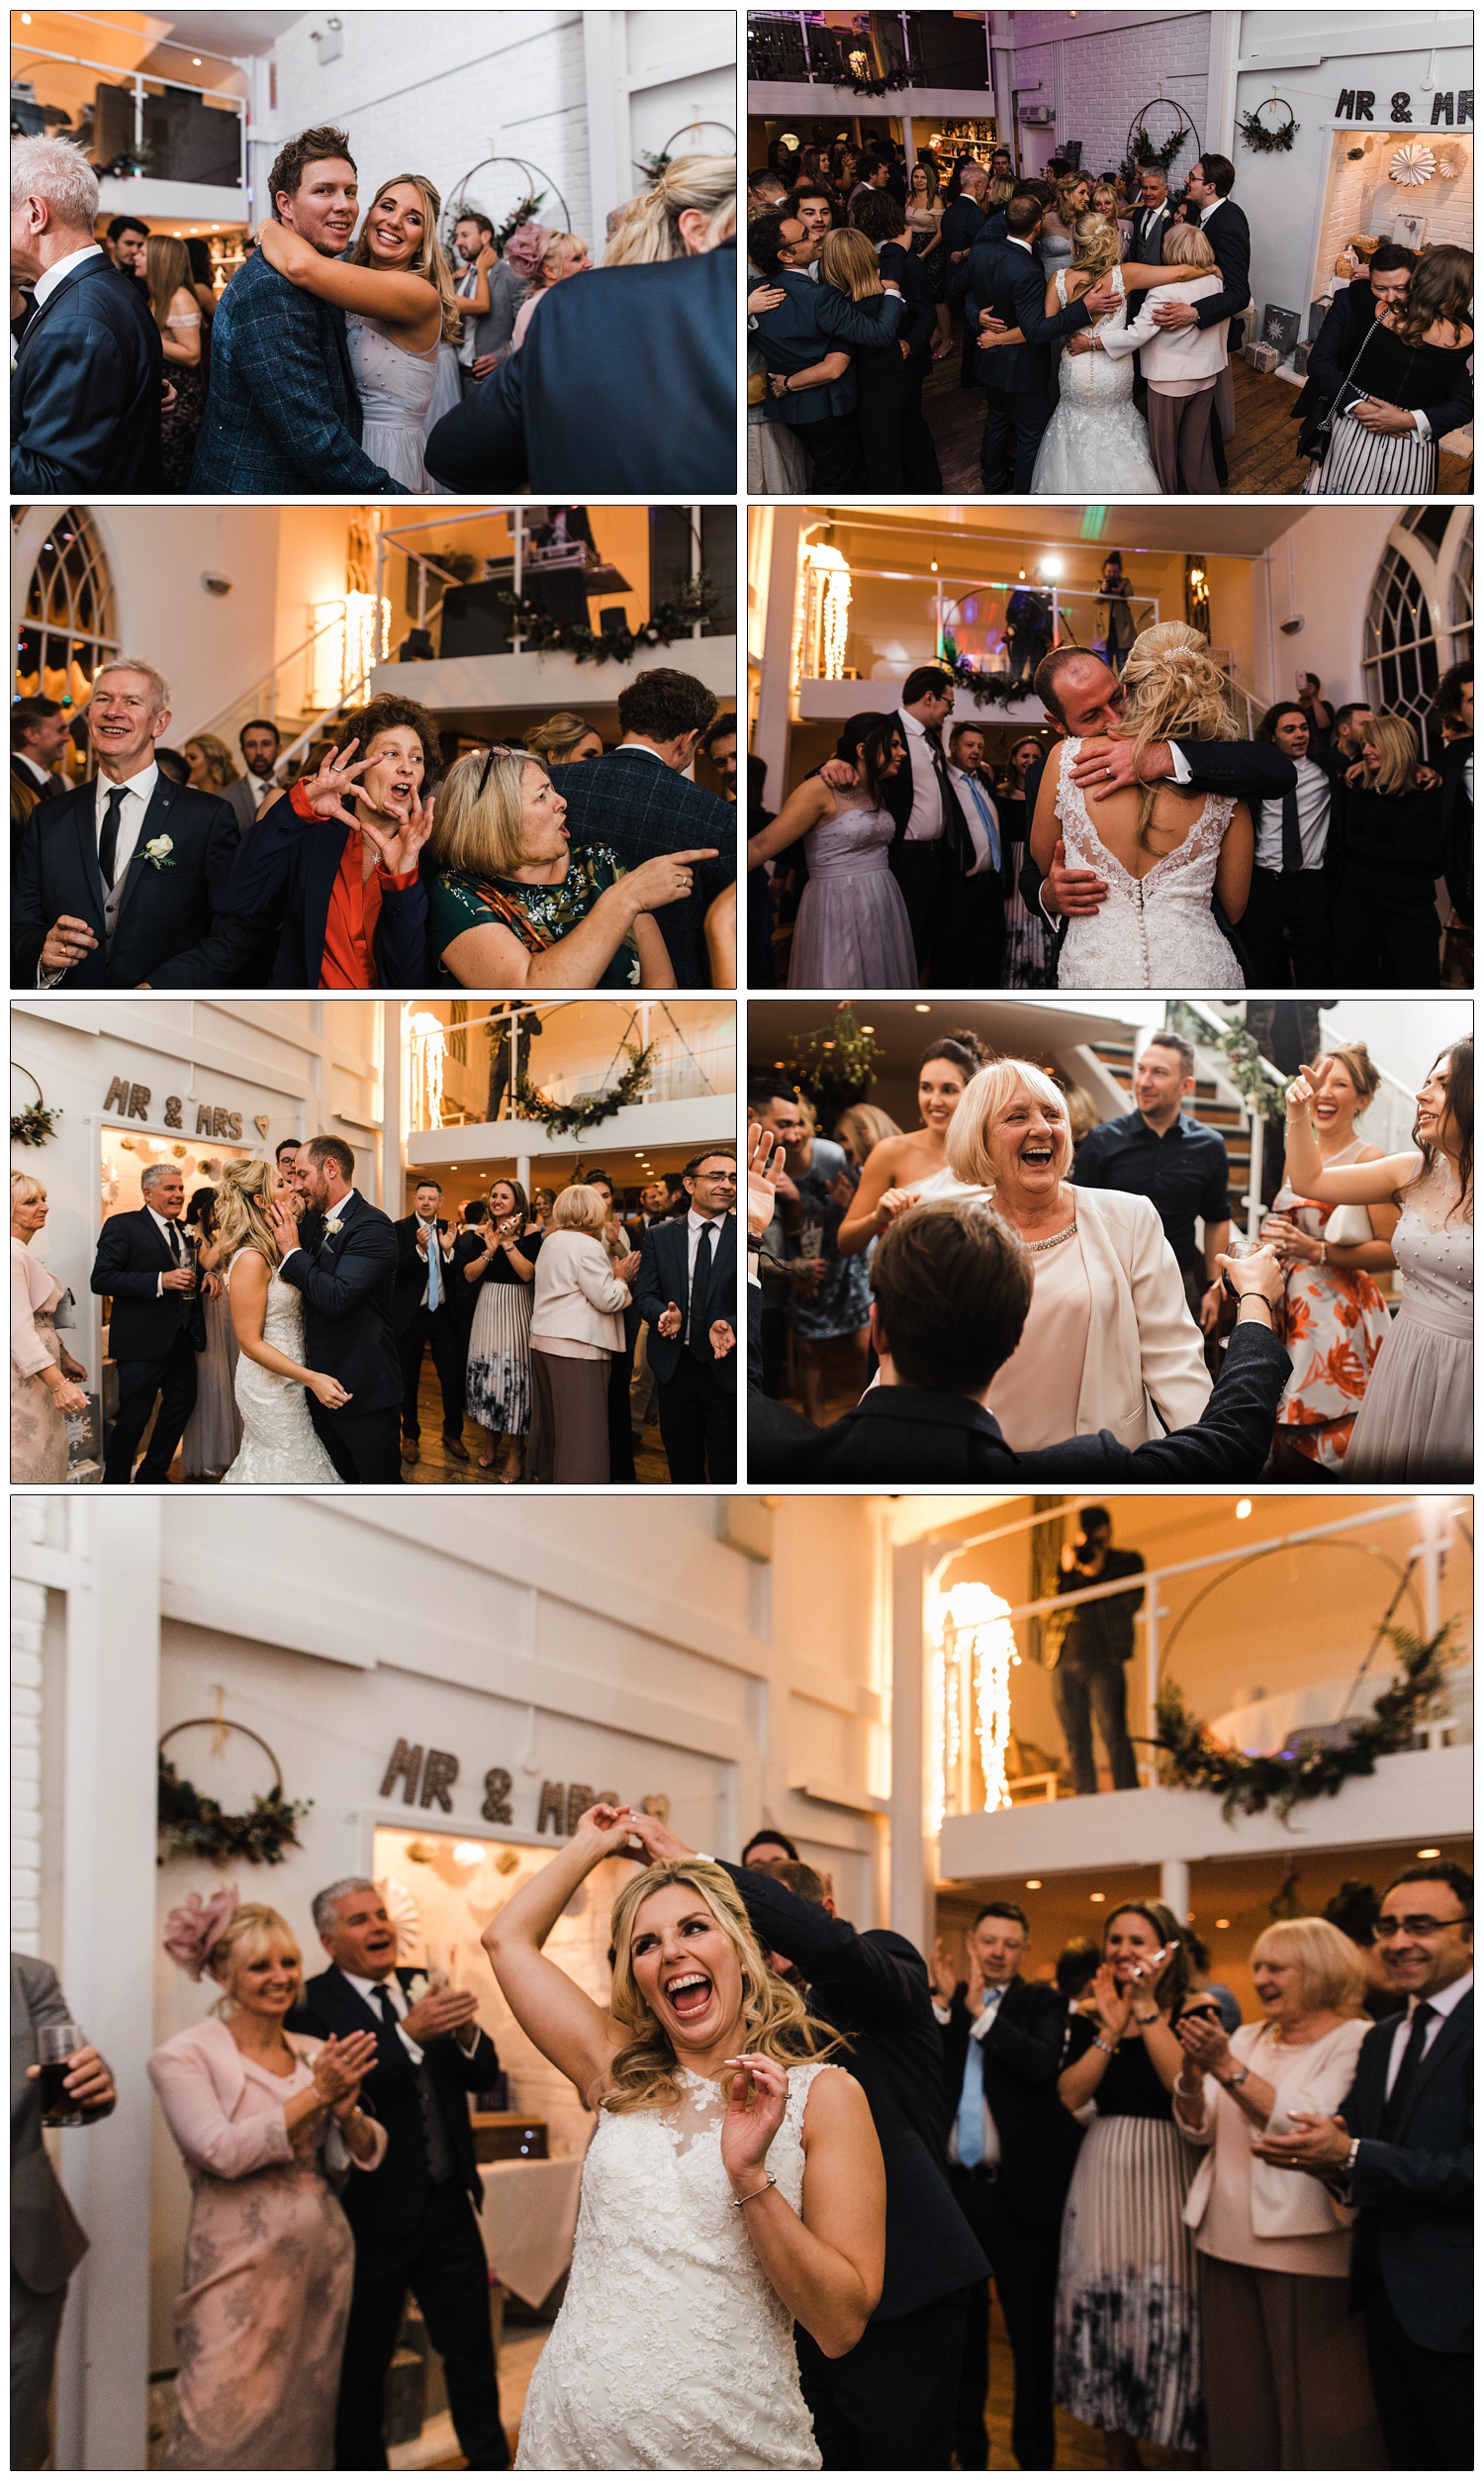 In Rayleigh in the Old Parish Rooms there is a packed dance floor for a December wedding. There is laughter, kissing, pointing and dancing.